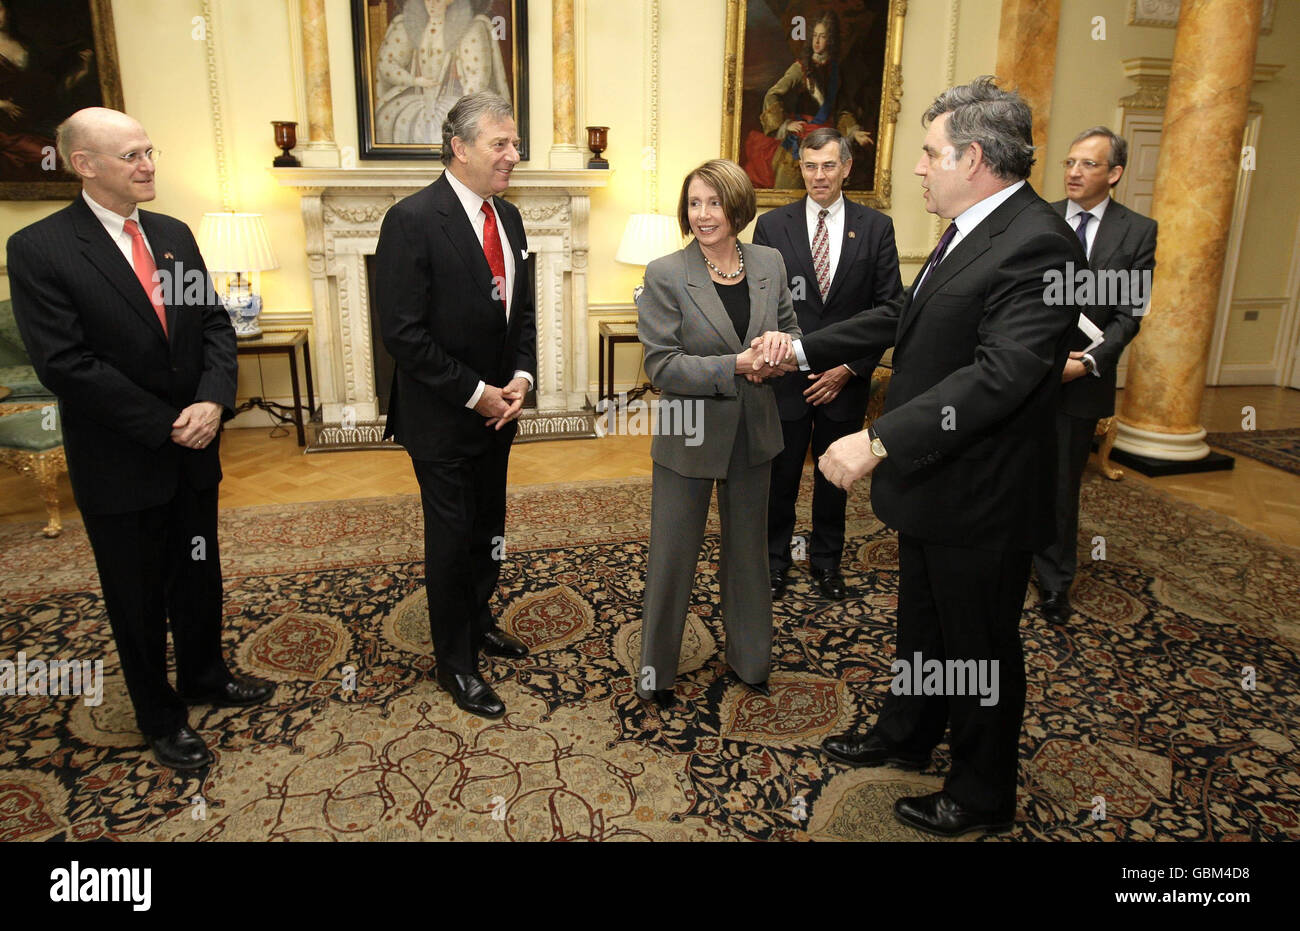 Britain's Prime Minister Gordon Brown meets with Nancy Pelosi, Speaker of the US House of Representatives, and her husband Paul Pelosi (second left) in 10 Downing Street in London. Stock Photo